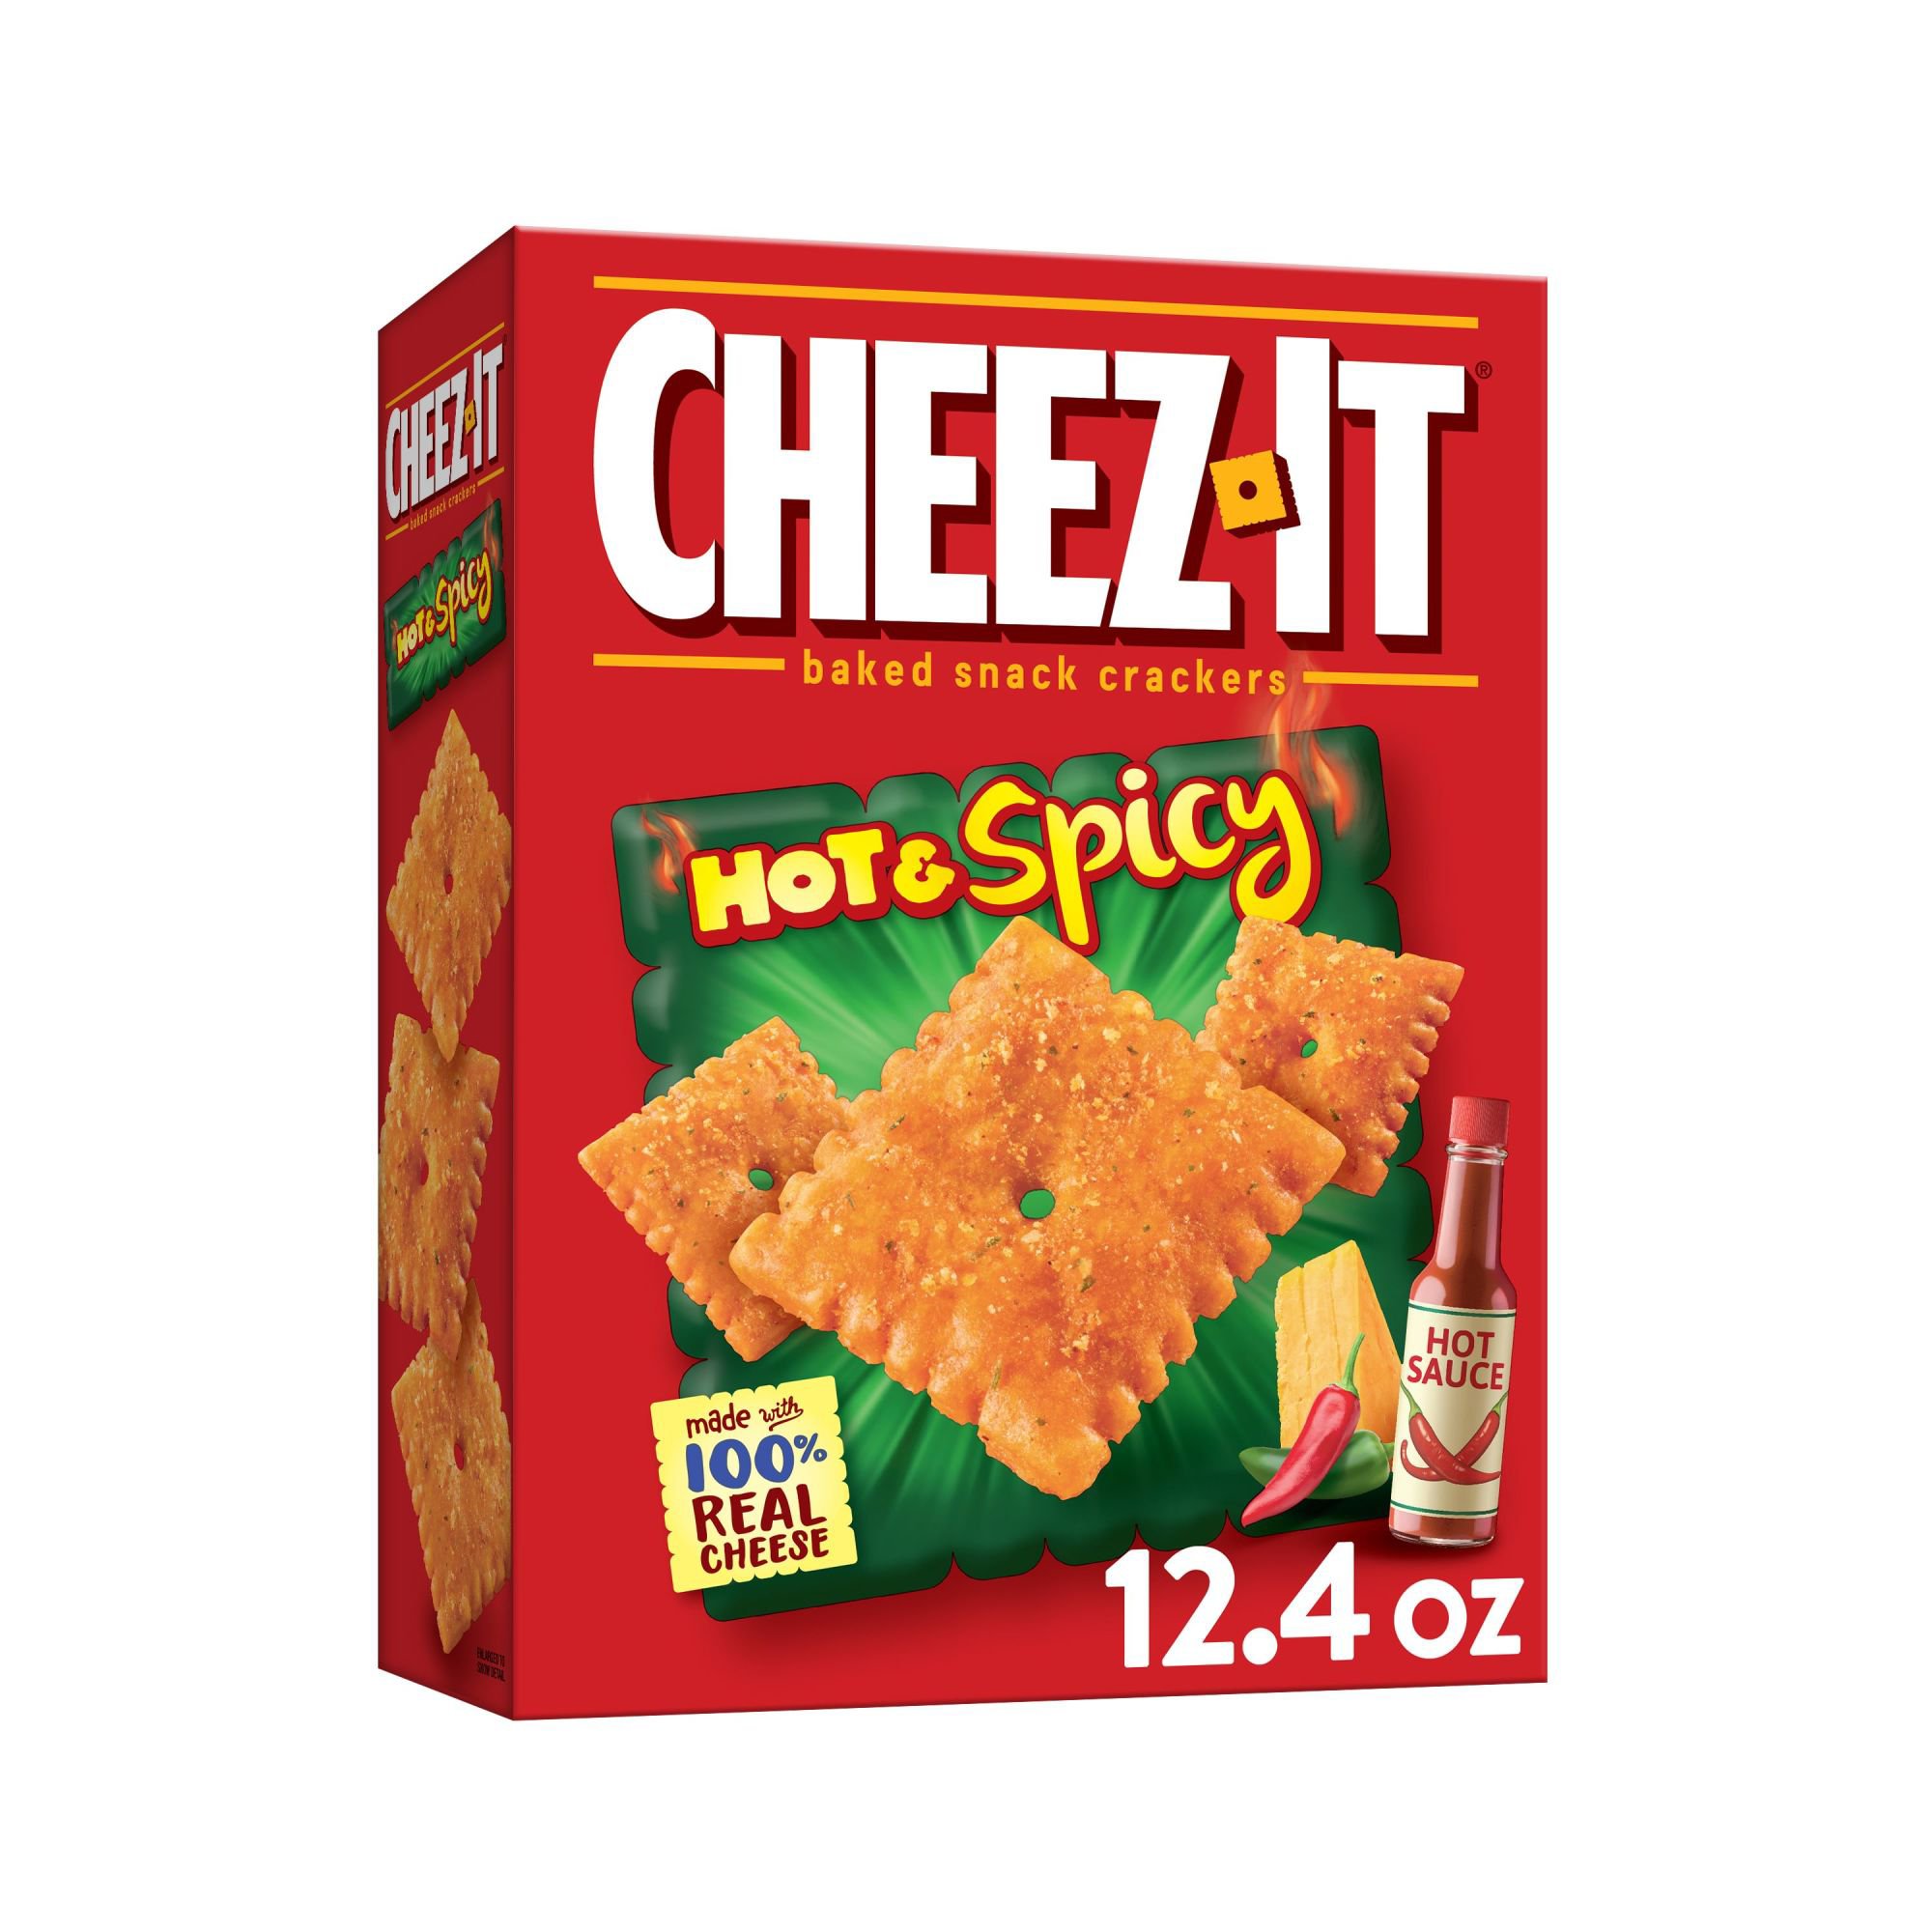 Cheez‑It Hot & Spicy Crackers